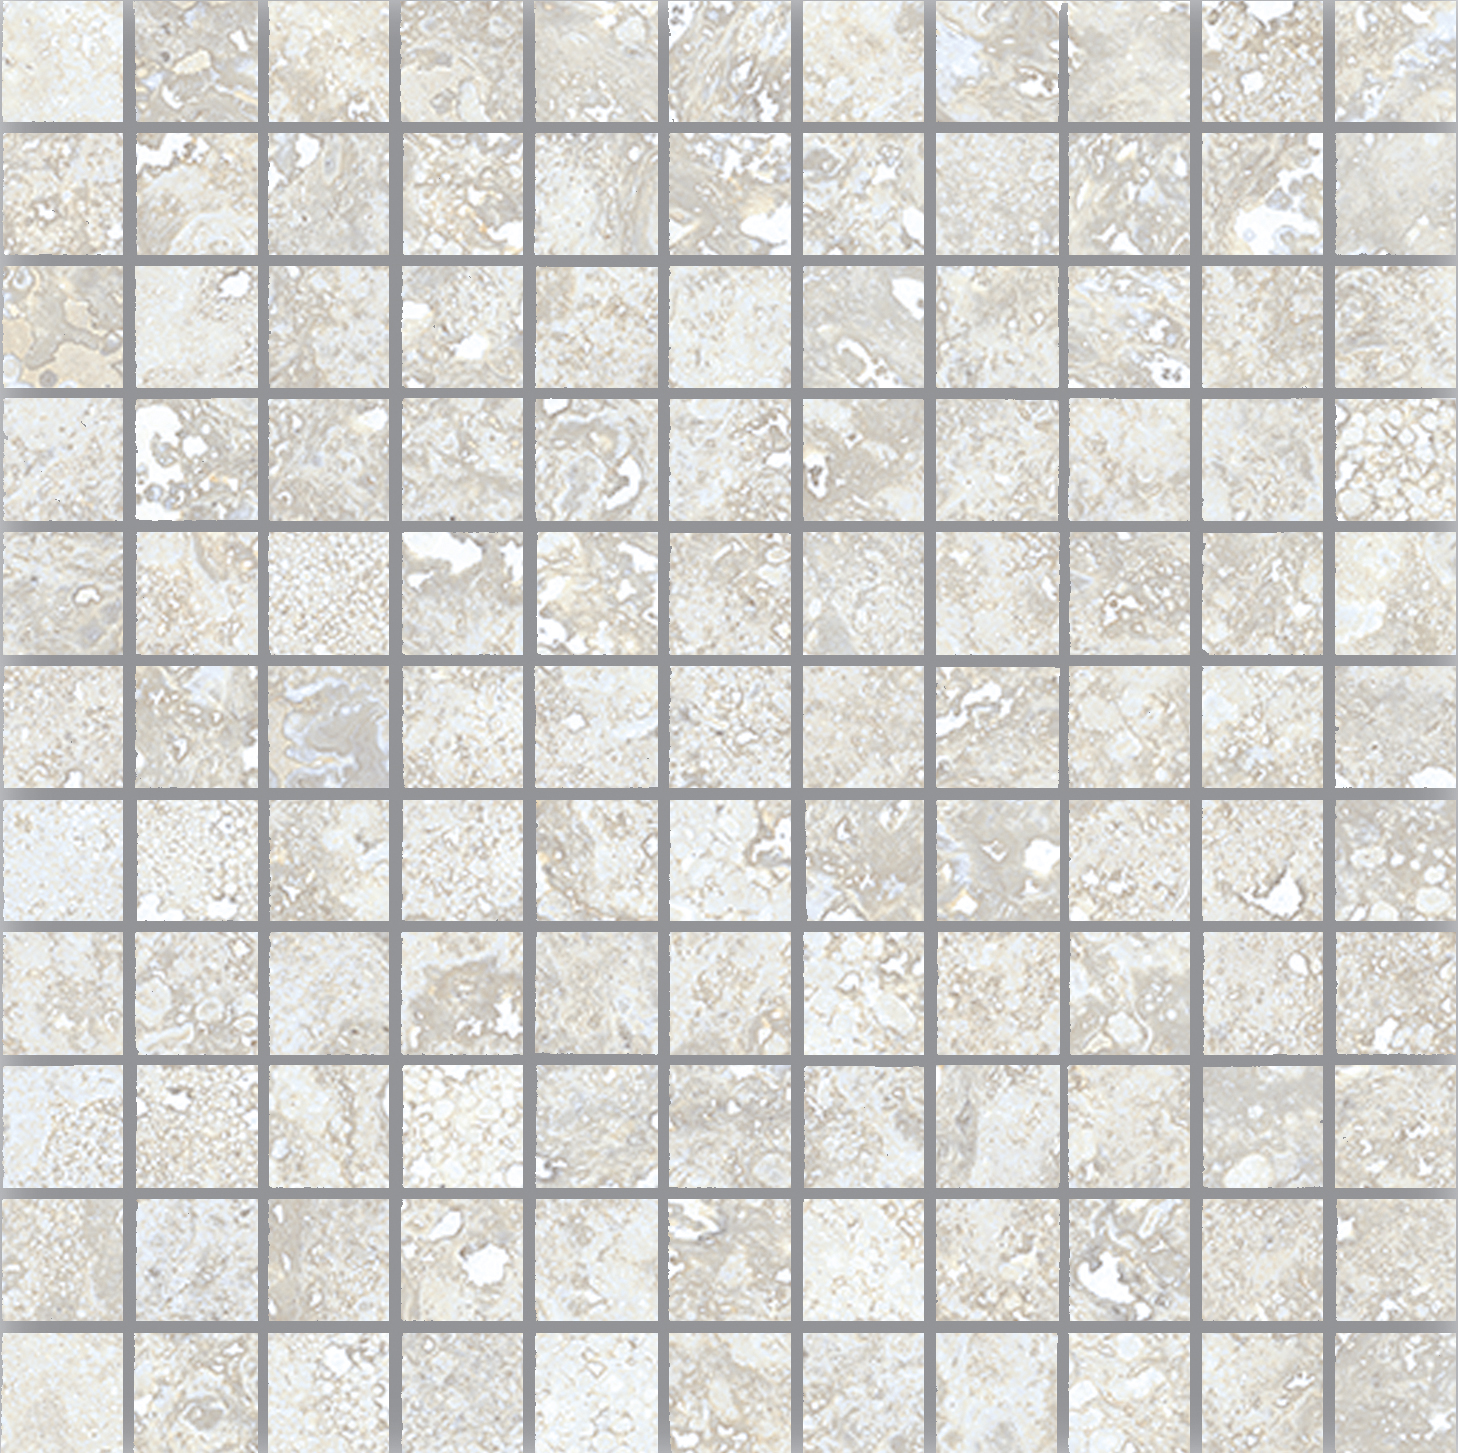 La Fabbrica Imperial Trevi Naturale Mosaic 155332 naturale 30x30cm rectified 8,8mm